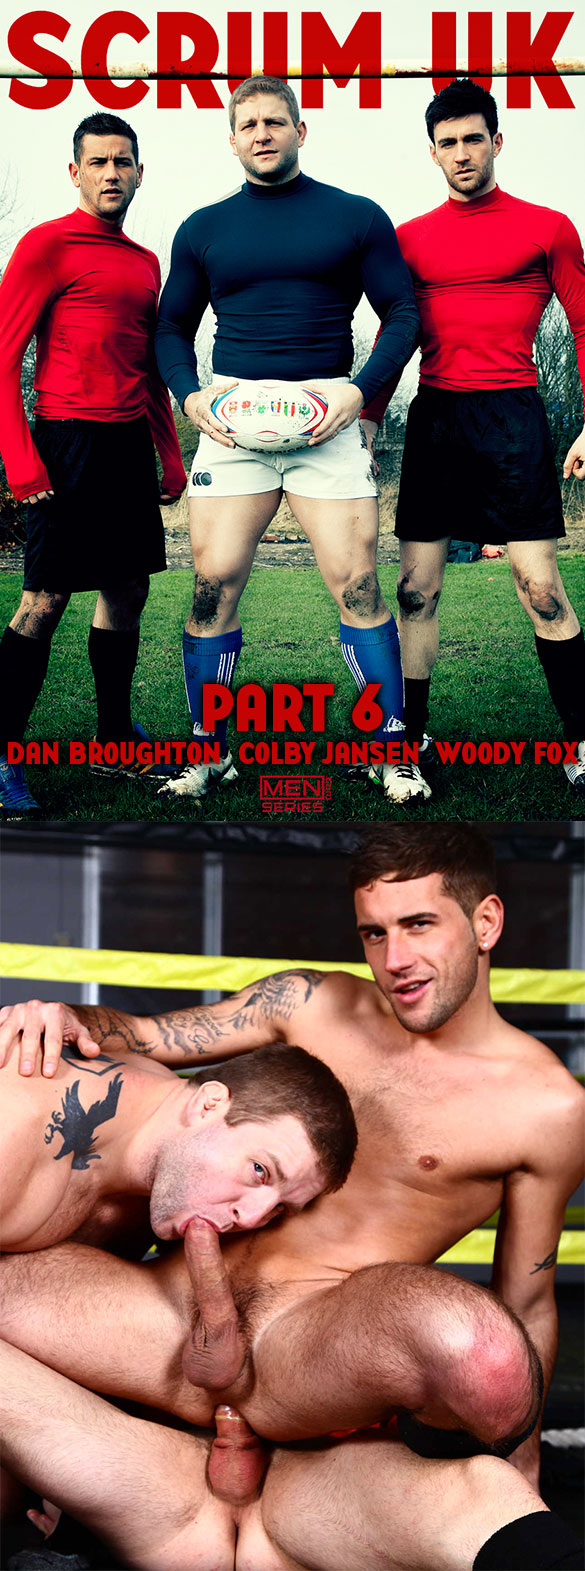 Men.com: Dan Broughton gets fucked by Colby Jansen and Woody Fox in “Scrum, Part 6”